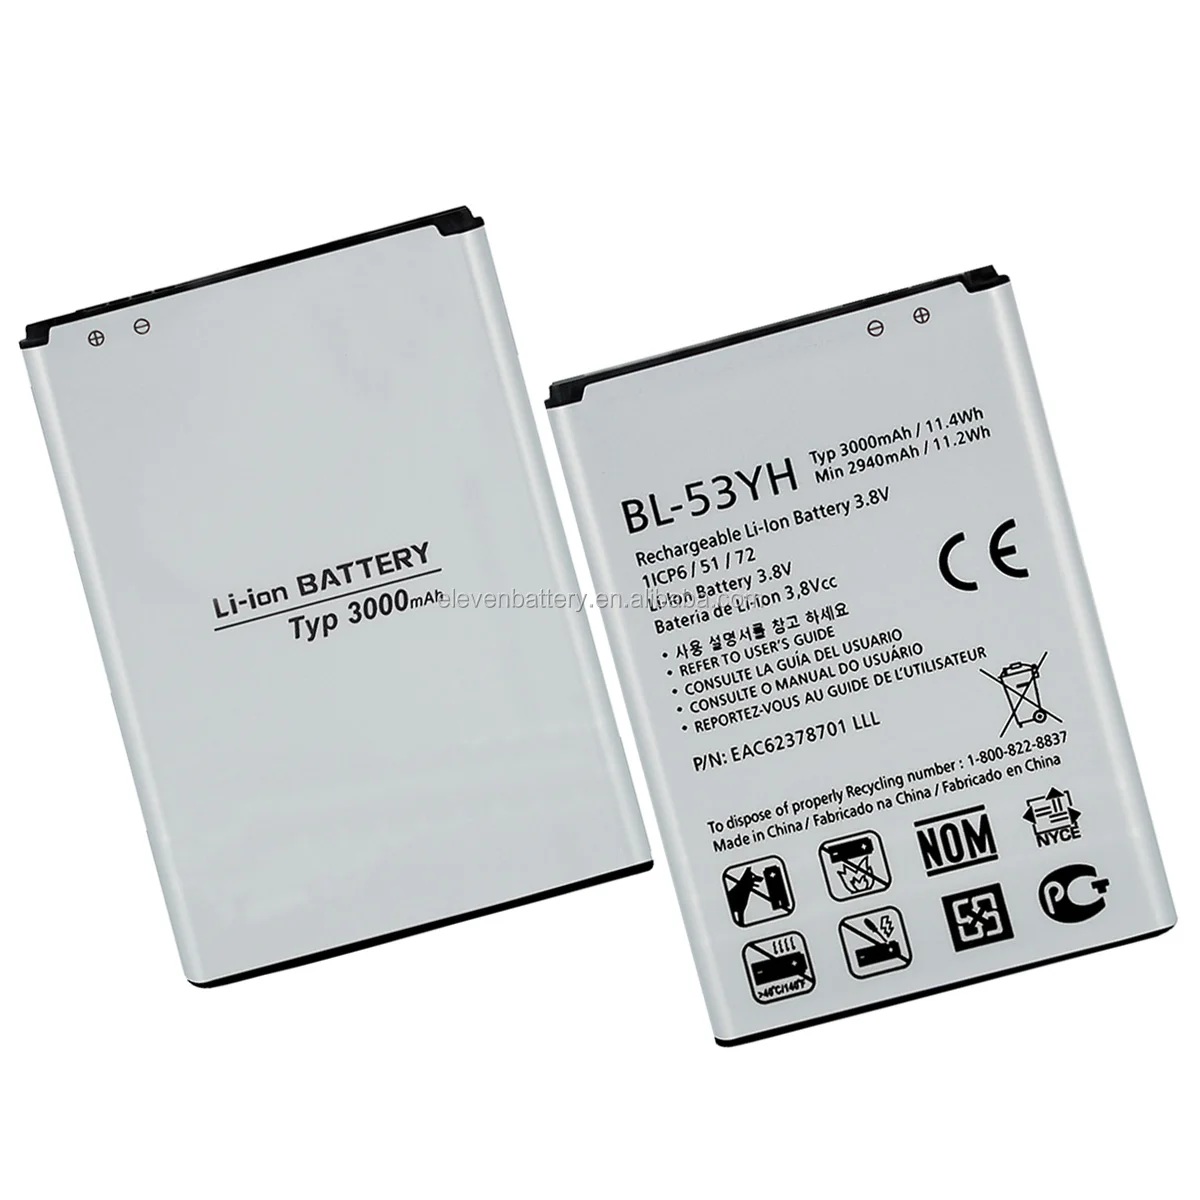 Schots paniek strategie Cell Phone Battery Pack Bl-53yh For Lg G3 D855 Rechargeable Batterie - Buy  Cell Phone Battery Pack,For Lg G3 Battery,Batterie For Lg Product on  Alibaba.com